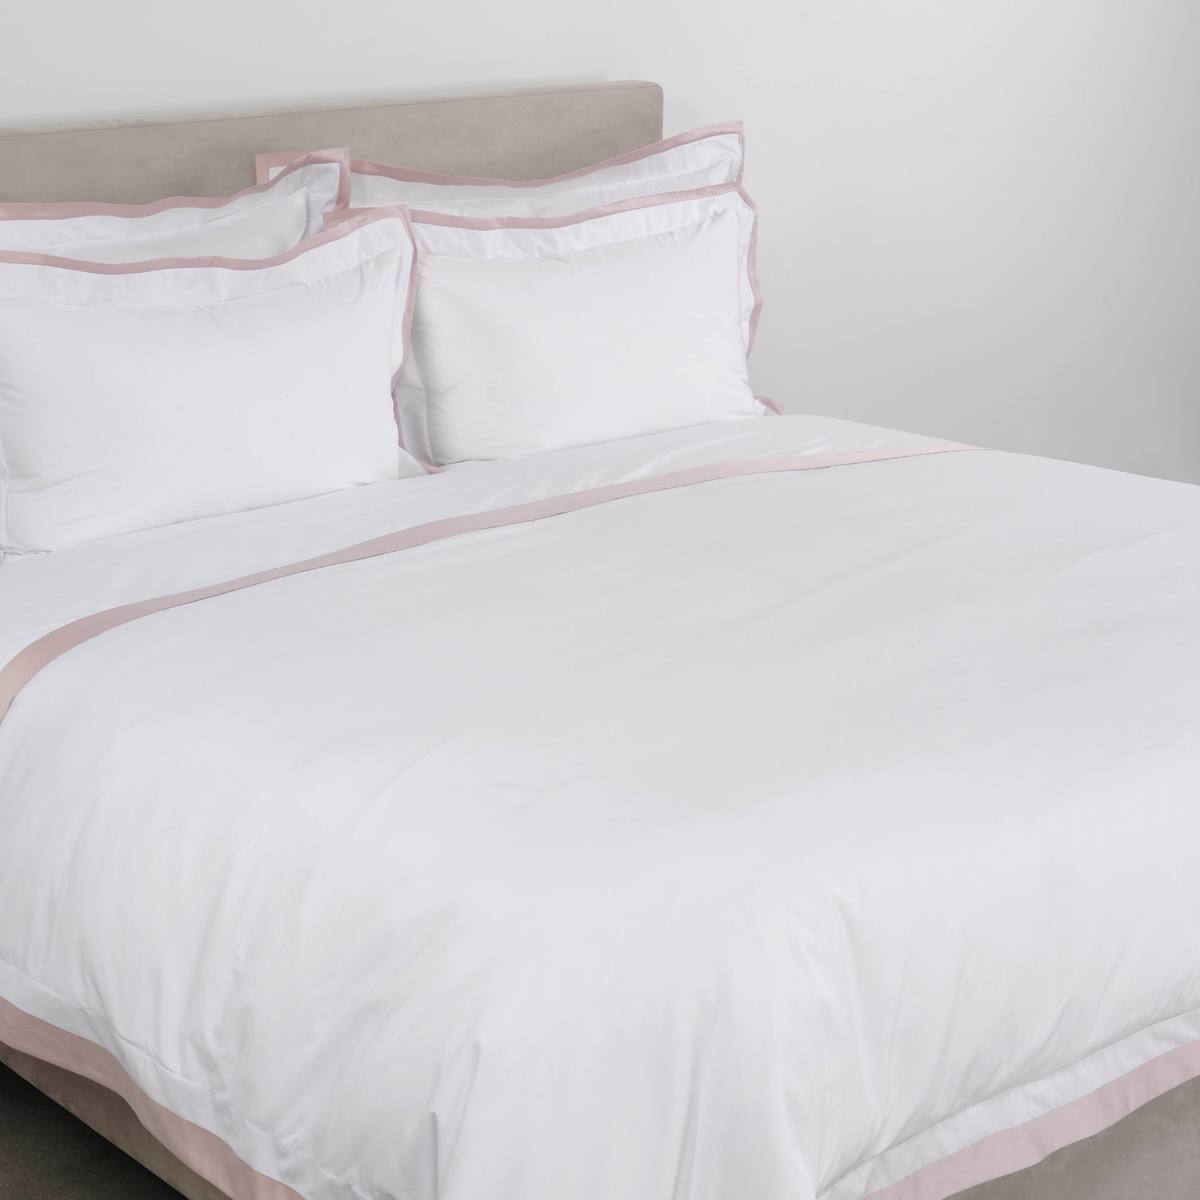 Side View of Full Bed Dressed in Celso de Lemos Hella Bedding in Nuage Rose Color